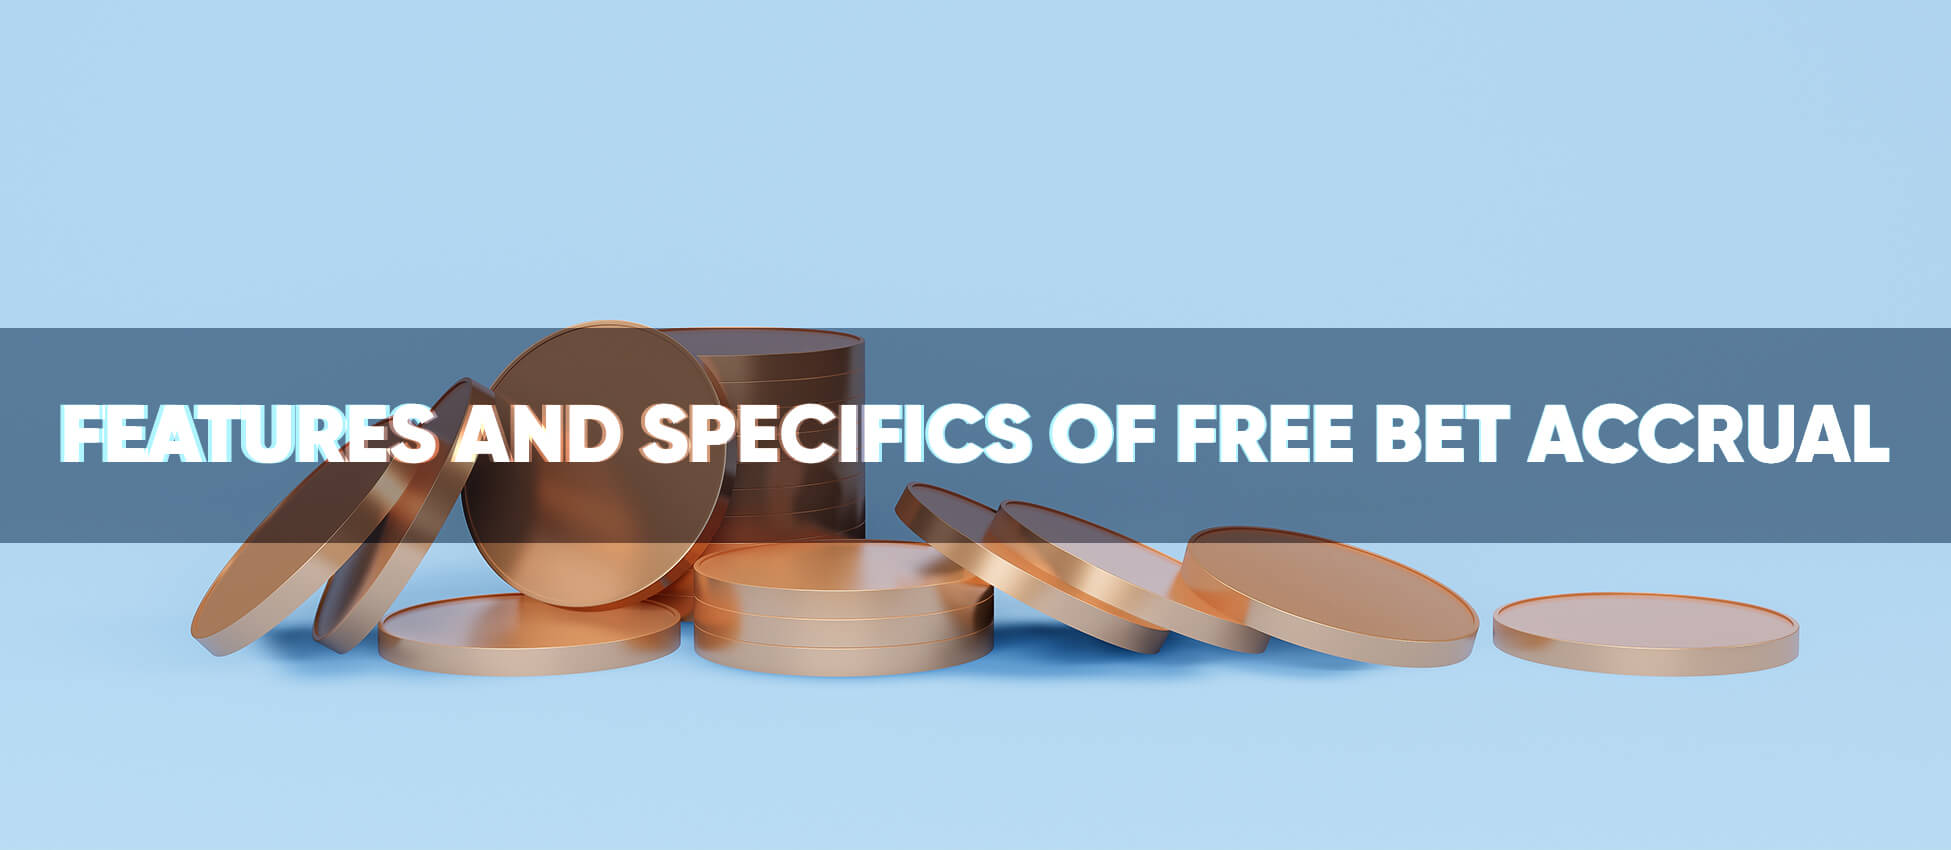 Features and specifics of free bet accrual